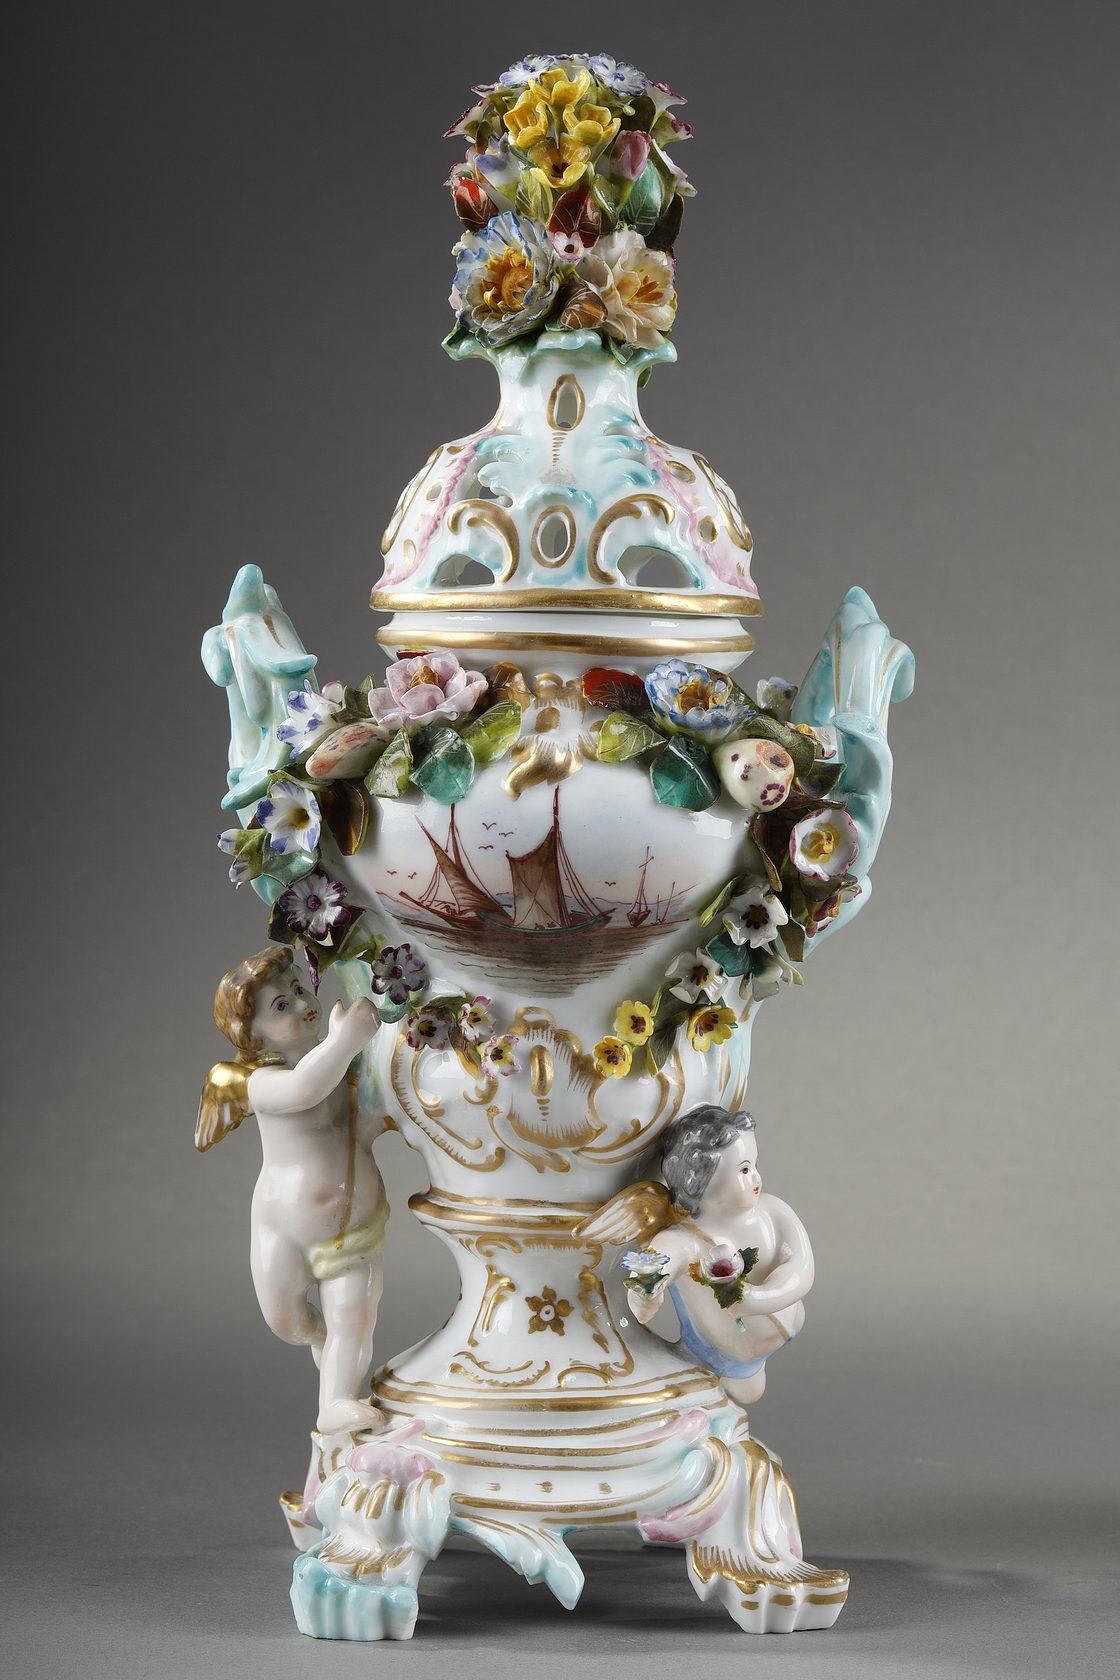 Pair of perfume burners in polychrome porcelain from the Meissen manufacture. They are crowned by removable openwork lids decorated with bouquets of flowers. Their bodies are decorated with flowers in relief forming cartouches in which are scenes